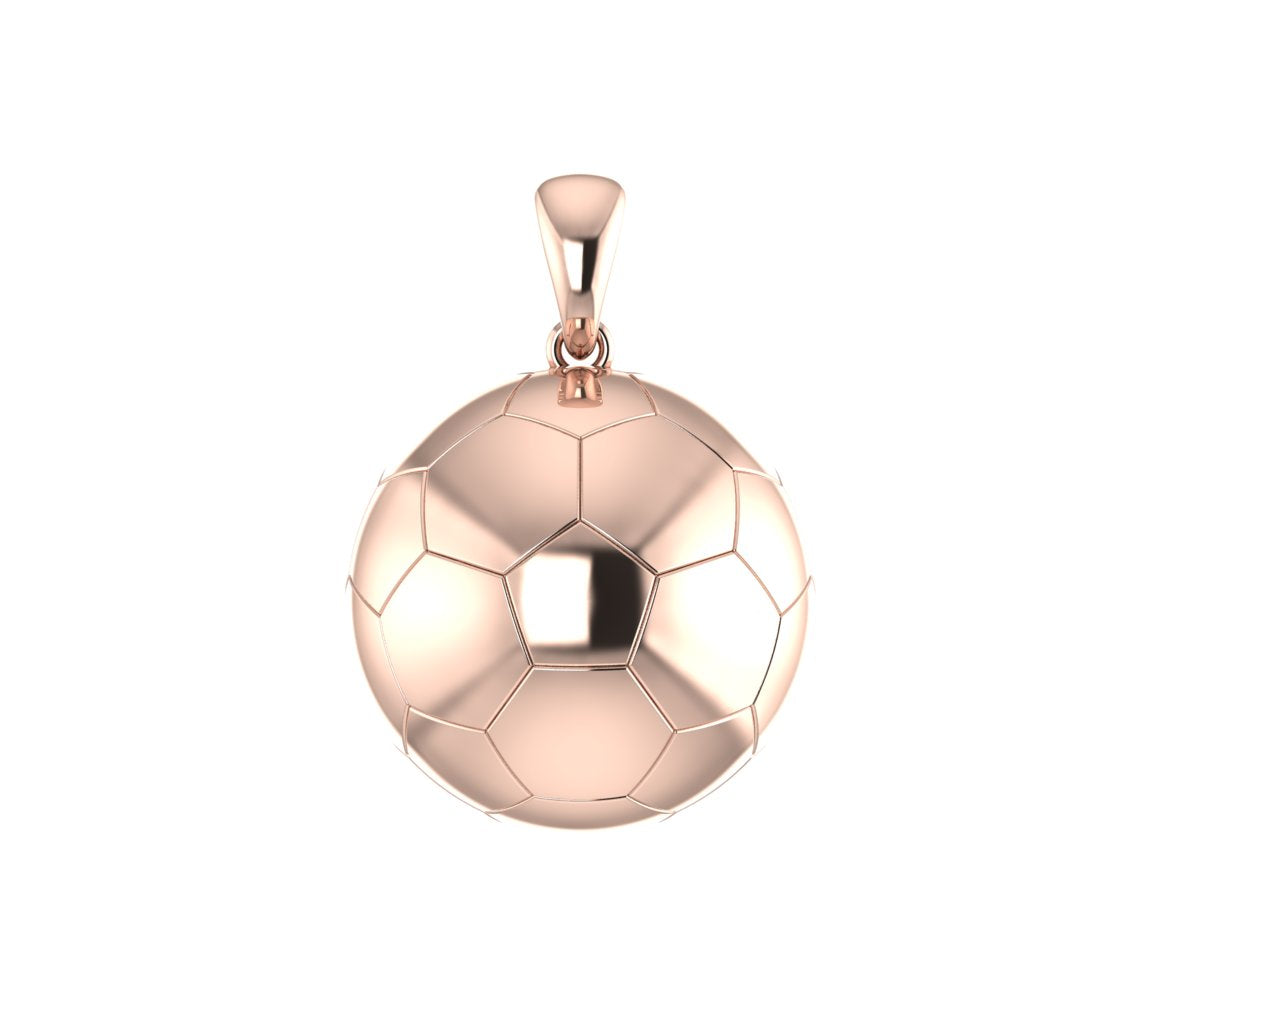 Petite Soccer Ball Necklace - 14K Yellow Gold – Henry D